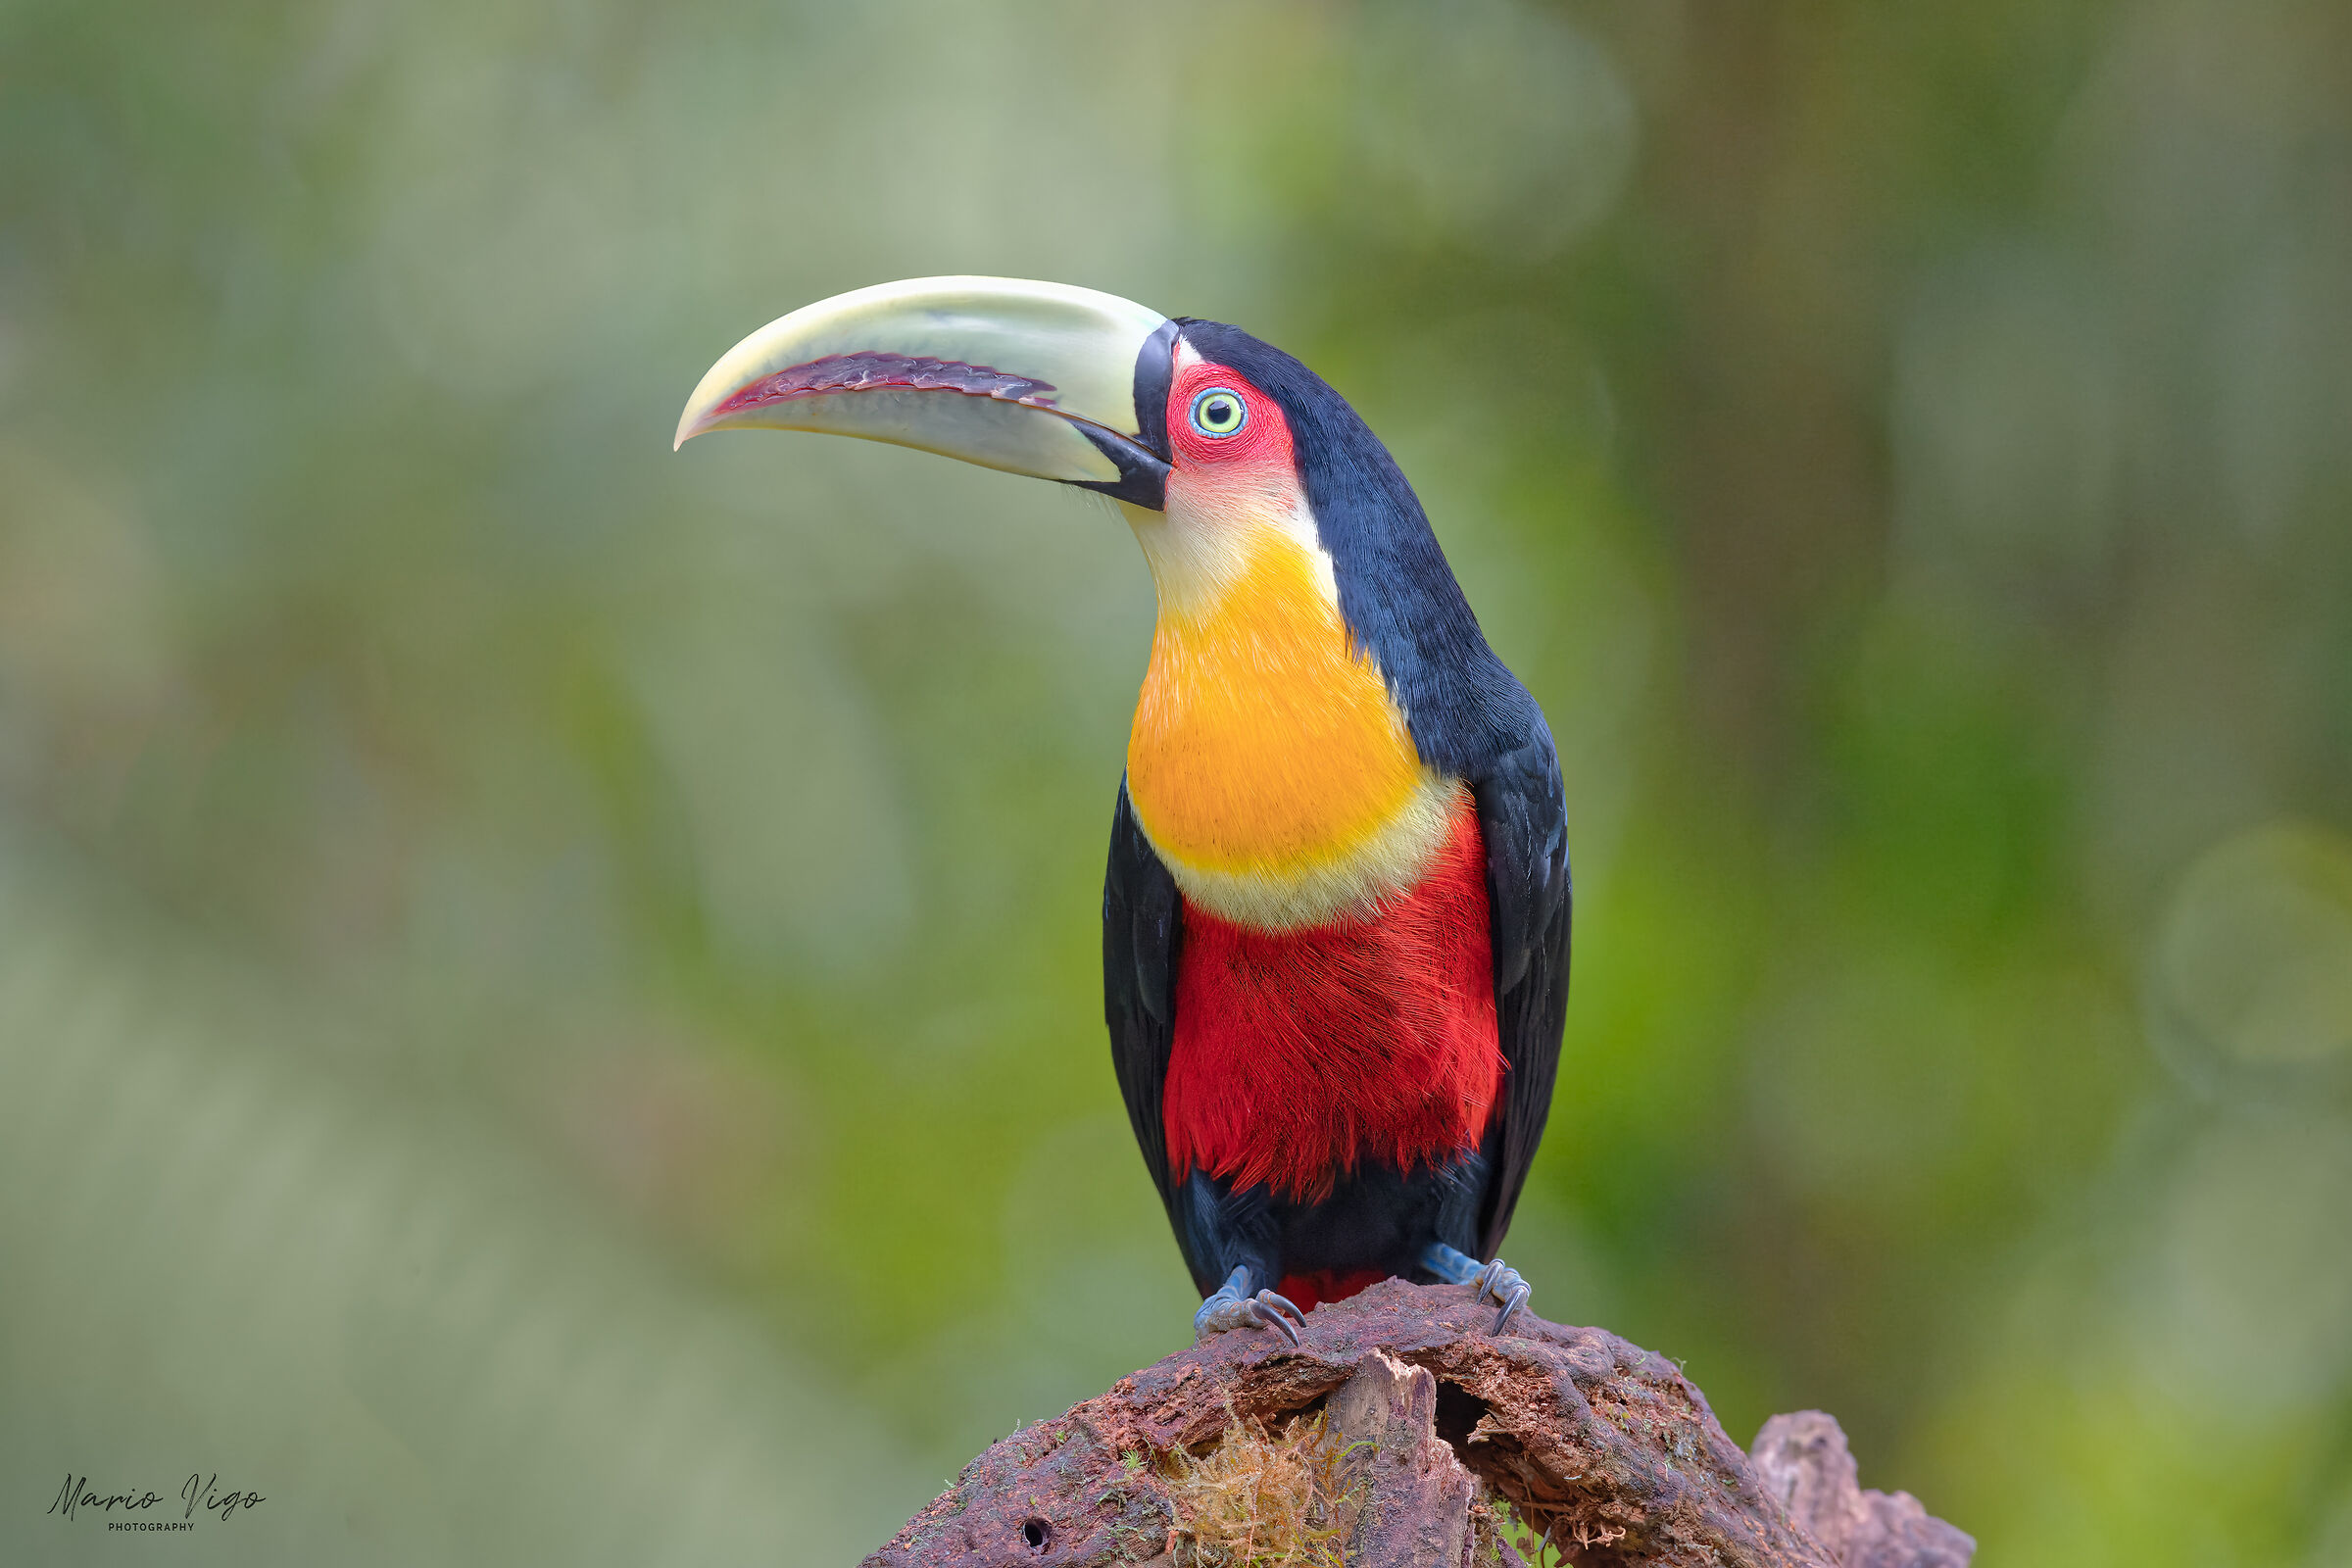 The colors of the red-breasted toucan...